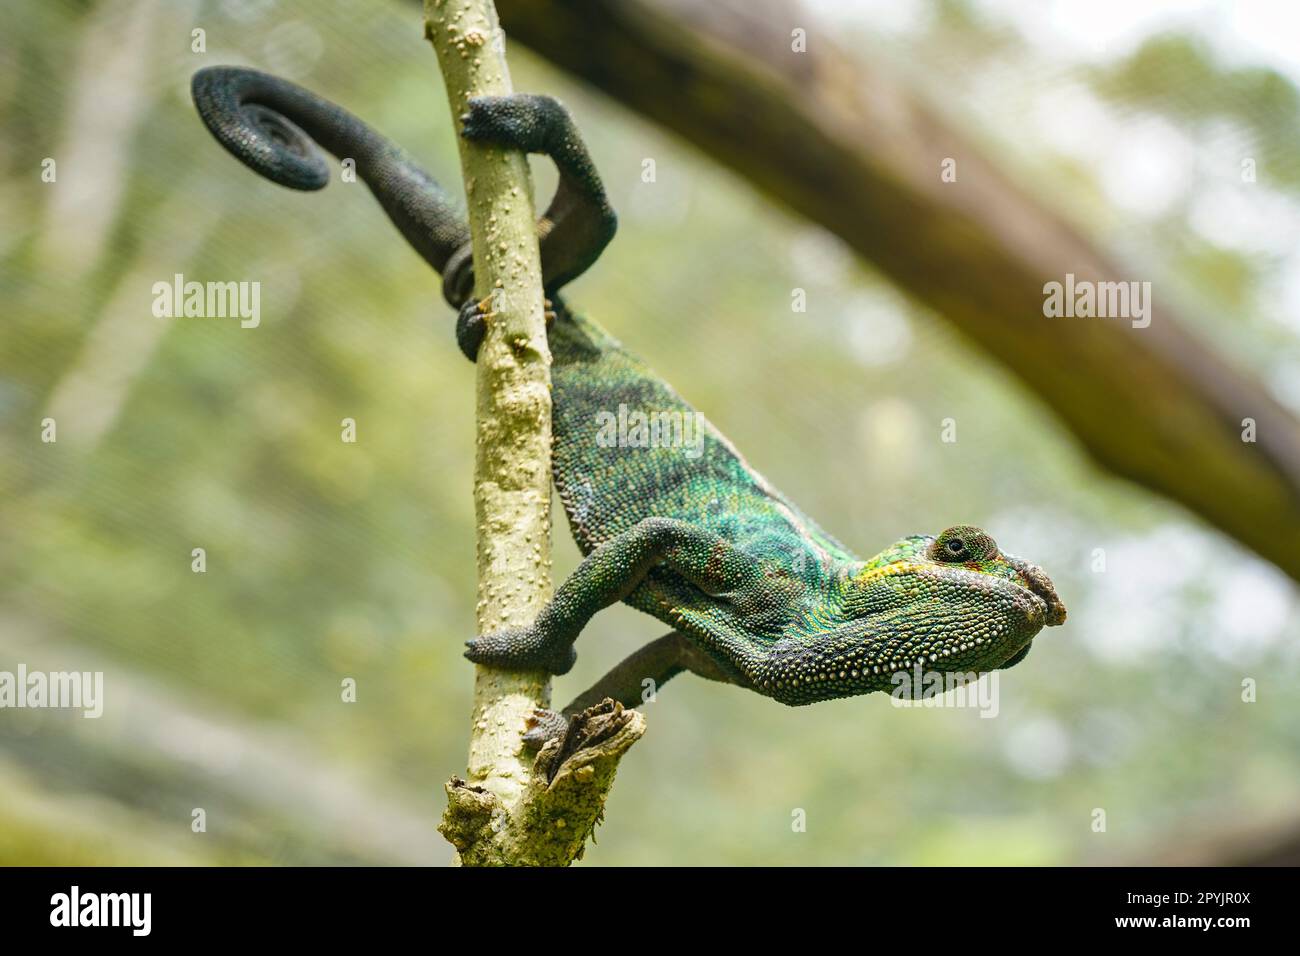 Small jewelled chameleon holding on tree twig, closeup detail Stock Photo